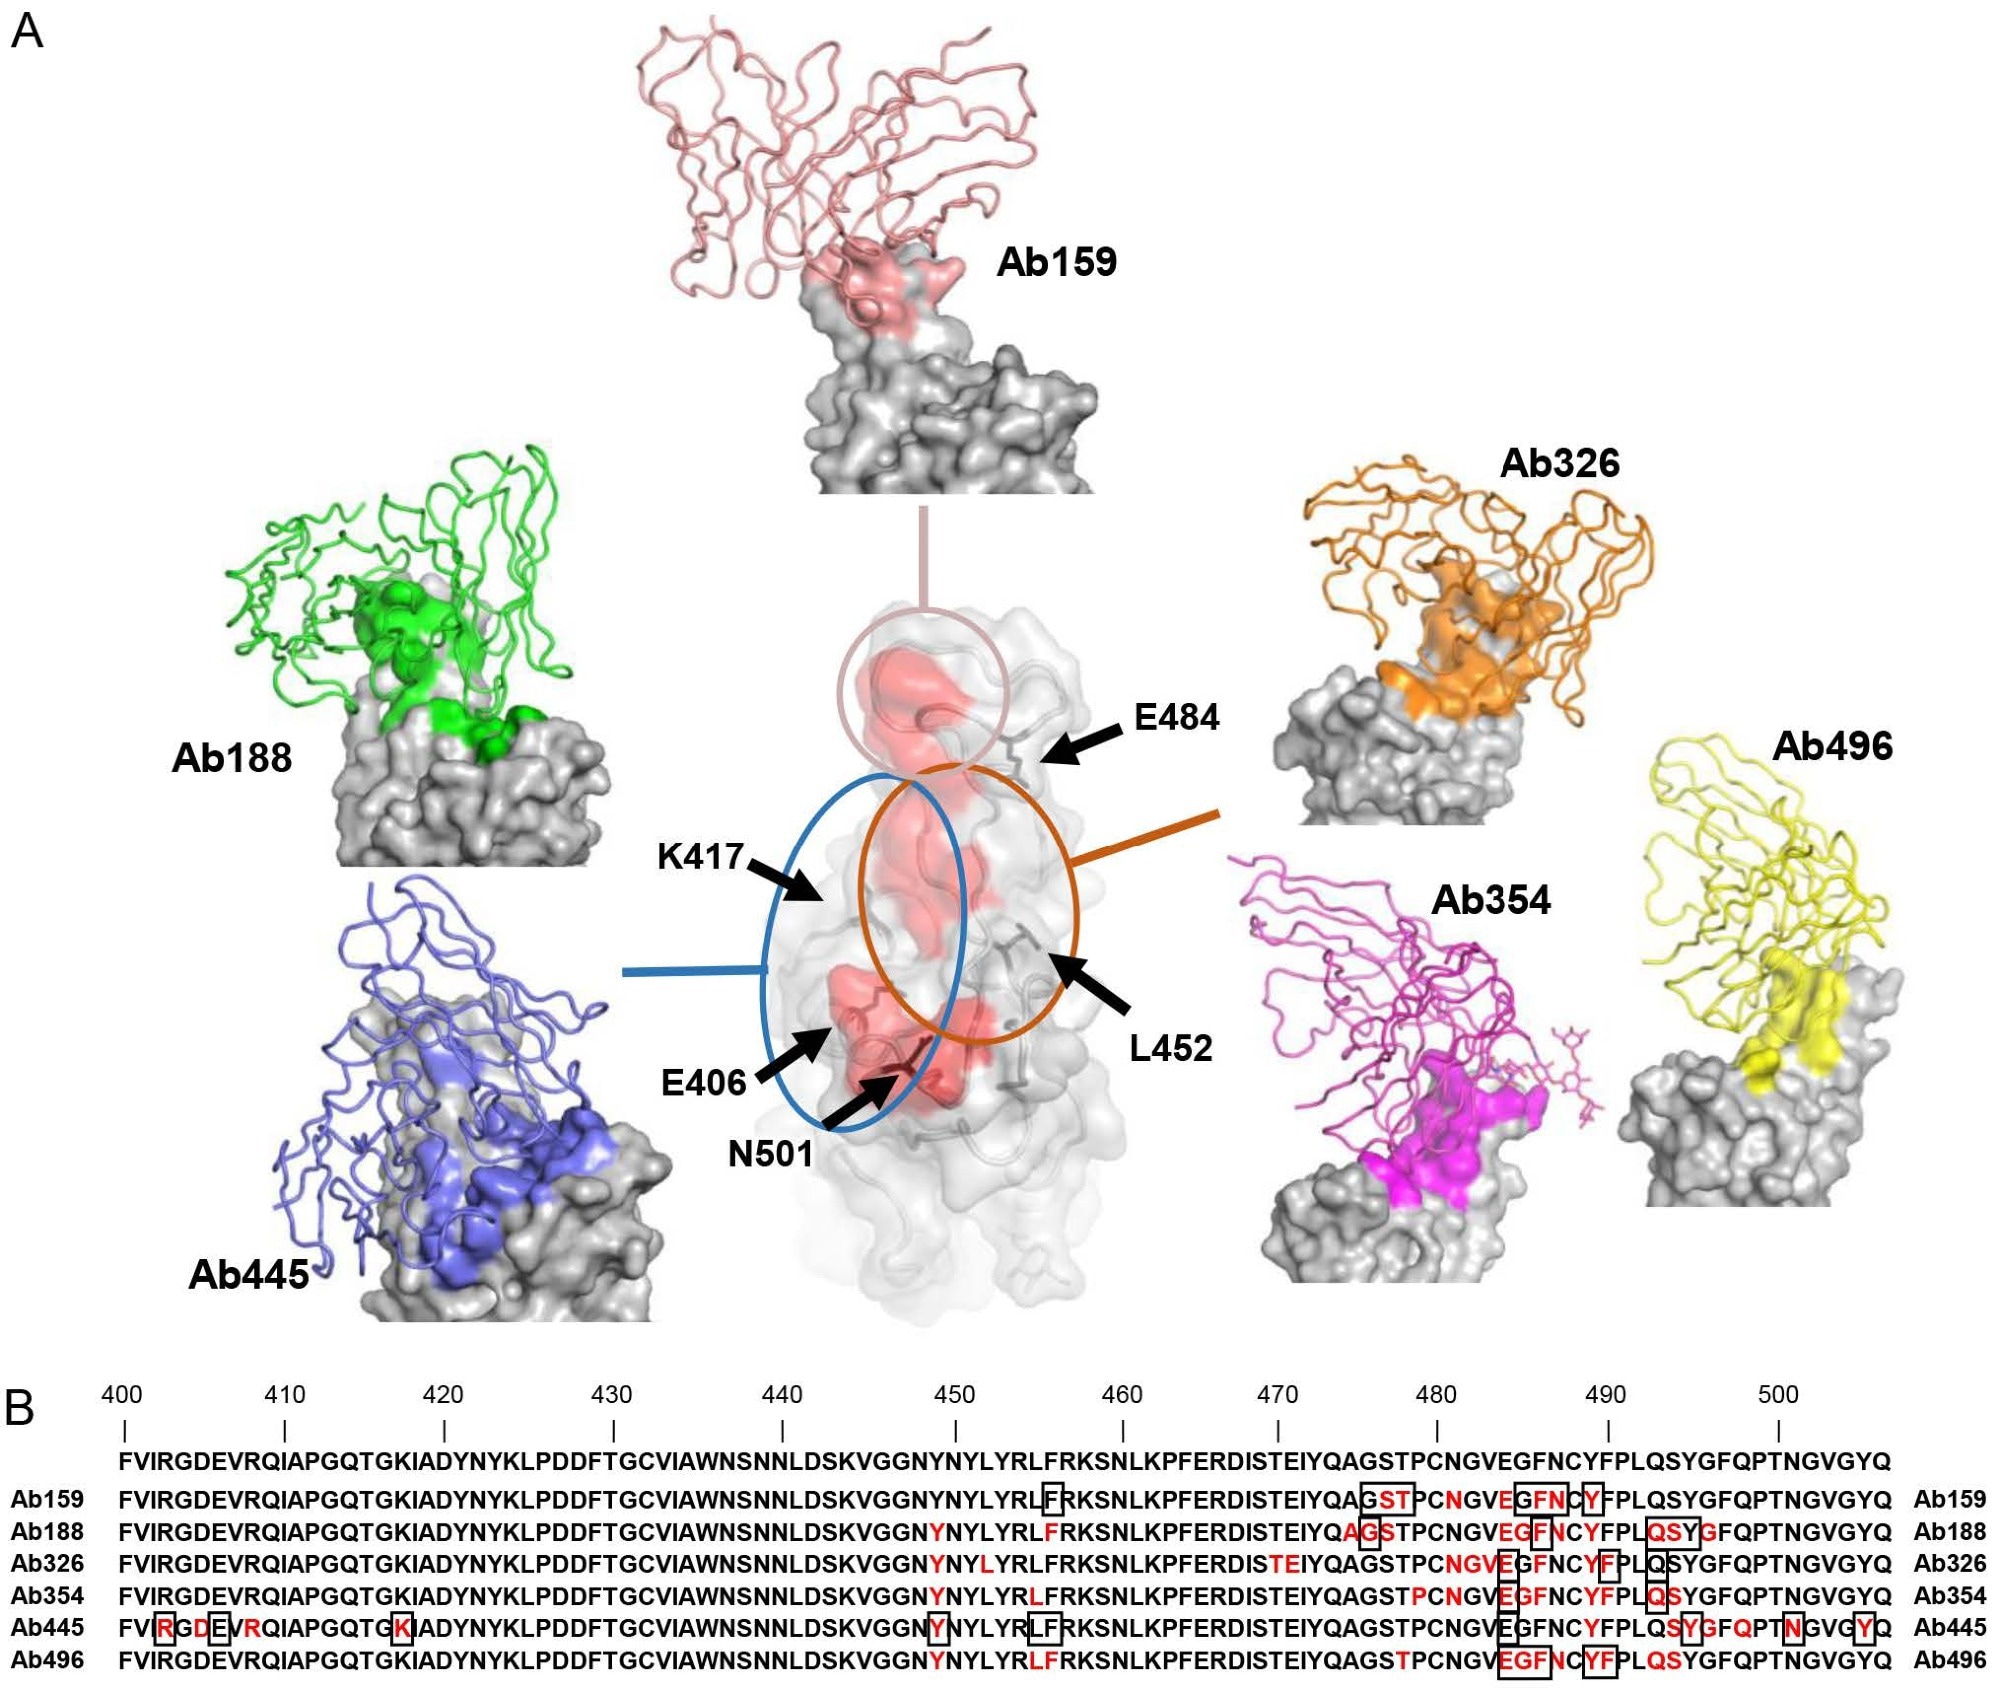 Cryo-EM structure of neutralizing antibodies (A) The structures of RBD and Ab159, Ab188, Ab326, Ab354, Ab445, and Ab496 are shown. Only the variable domains of antibodies are modeled and drawn as a cartoon tube (individual color) on the RBD surface (gray), and the epitope of each antibody is colored the same as each antibody. The red area in the central RBD is the binding residue of ACE2 (7A94) (Benton et al., 2020), showing the relationship between the binding sites of the antibodies, which are roughly divided into three groups. The positions of key amino acids are indicated by black arrows. (B) The residues 400-506 of Spike are shown. The epitopes revealed by cryo-EM are colored in red, and the residues affected by the mutation described in Figure 3A are shown in squares.